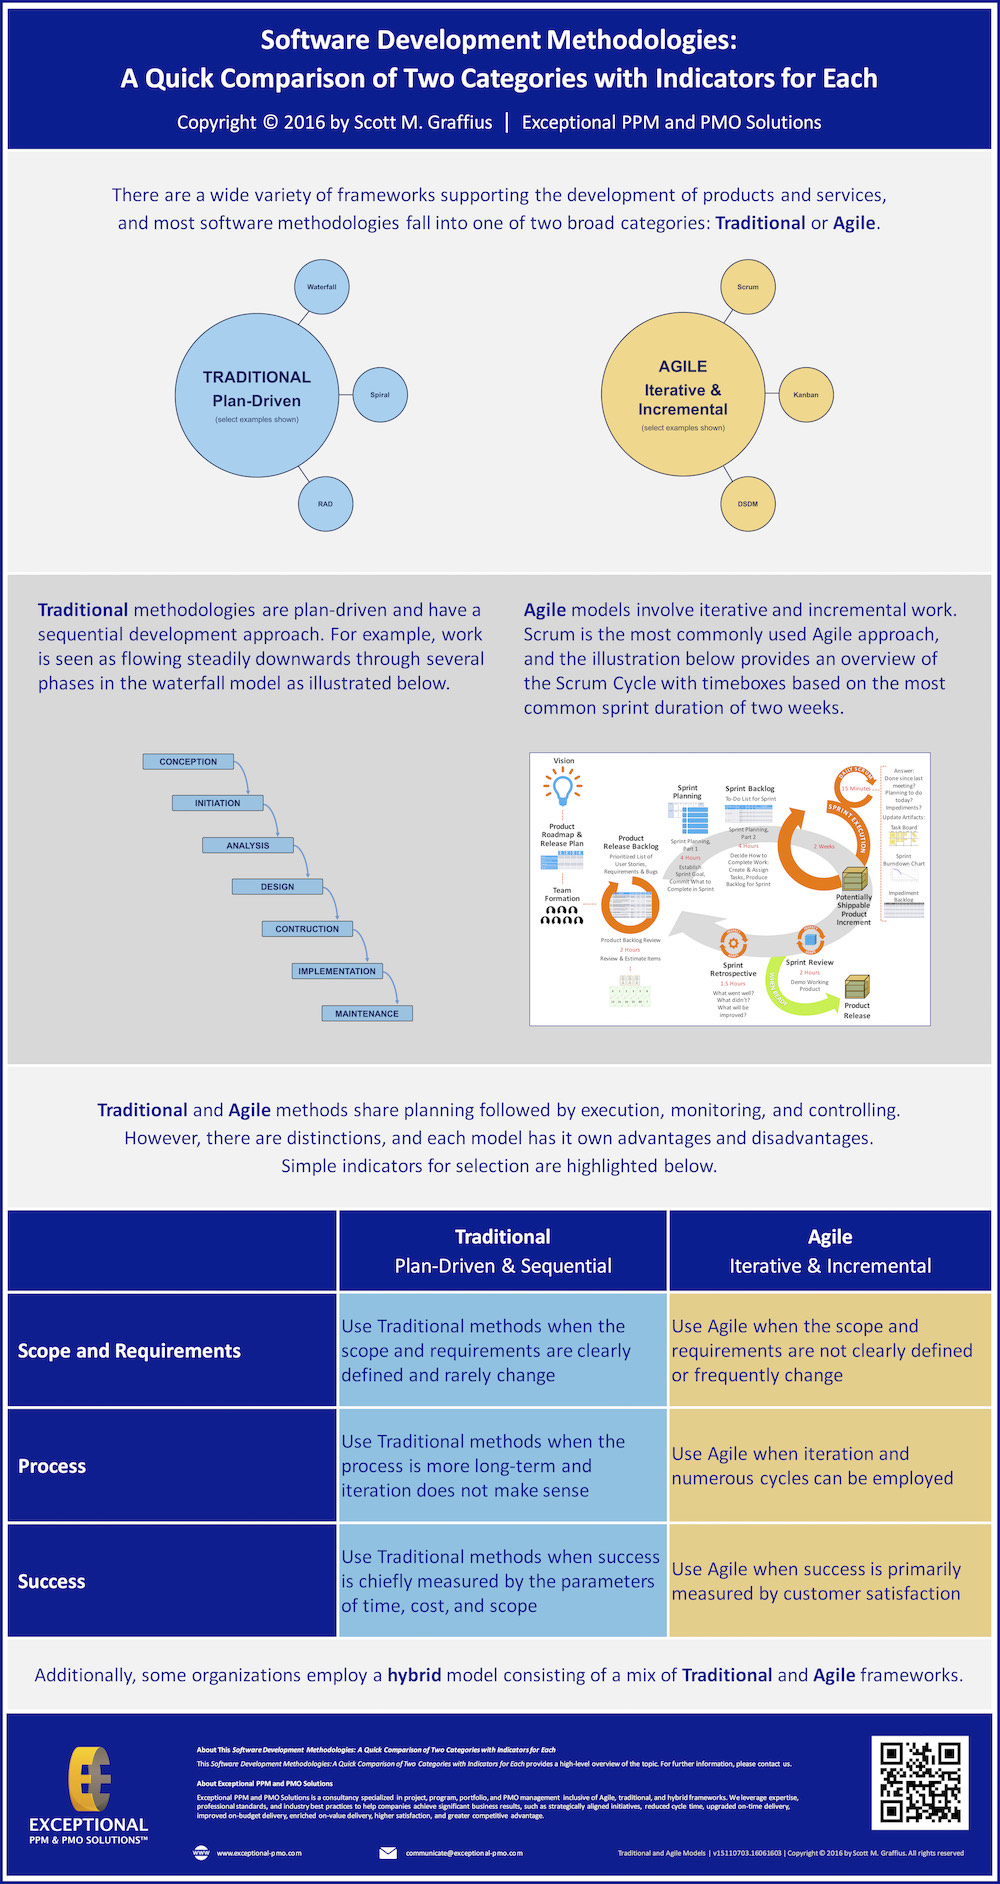 Scott-M-Graffius-Exceptional-PPM-and-PMO-Solutions-Infographic-Agile-and-Waterfall-LR-SQ